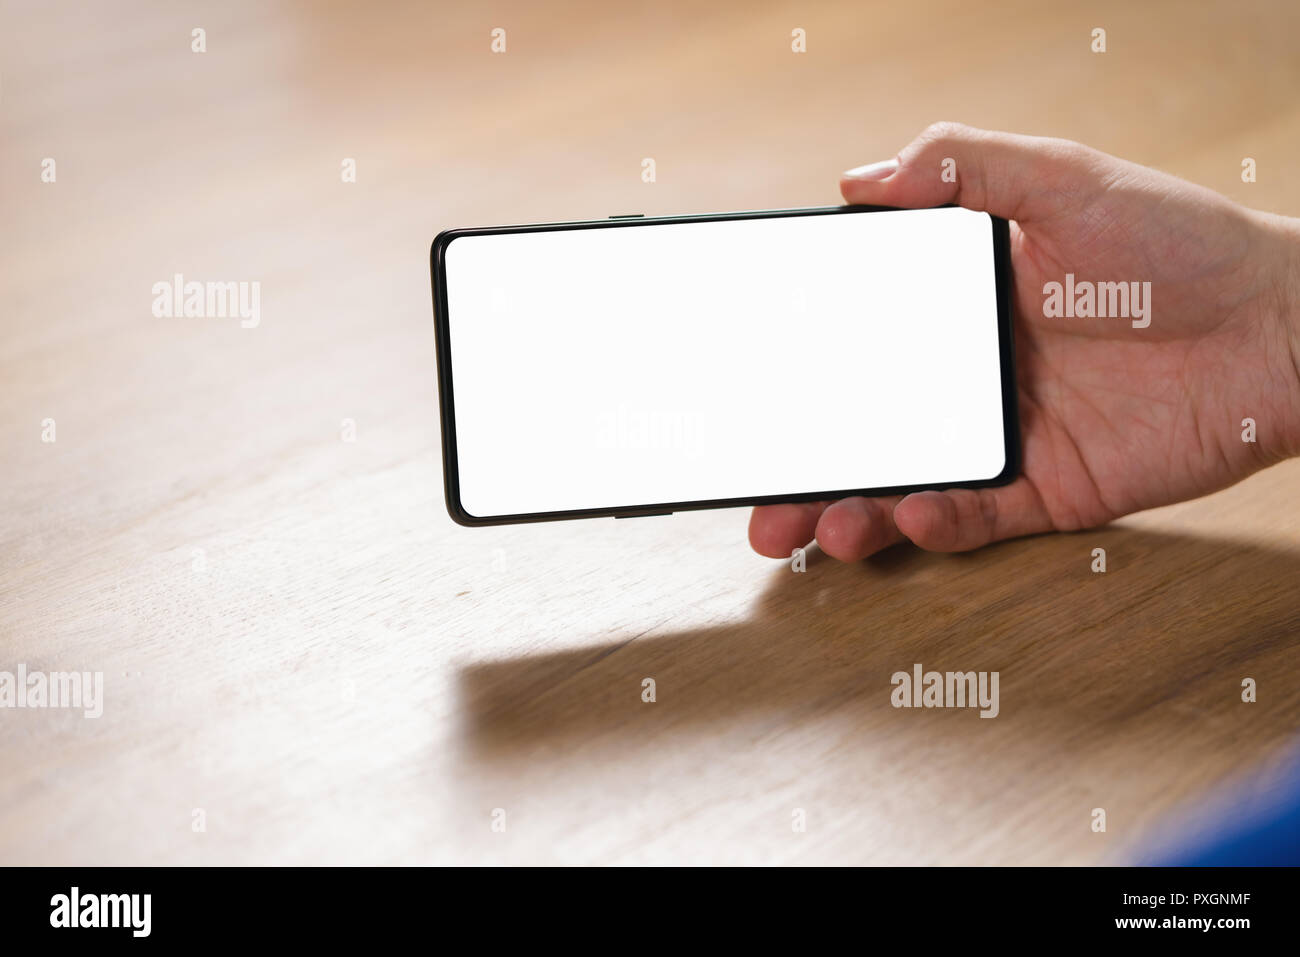 young man hand holding smartphone with blank white screen in landscape mode Stock Photo